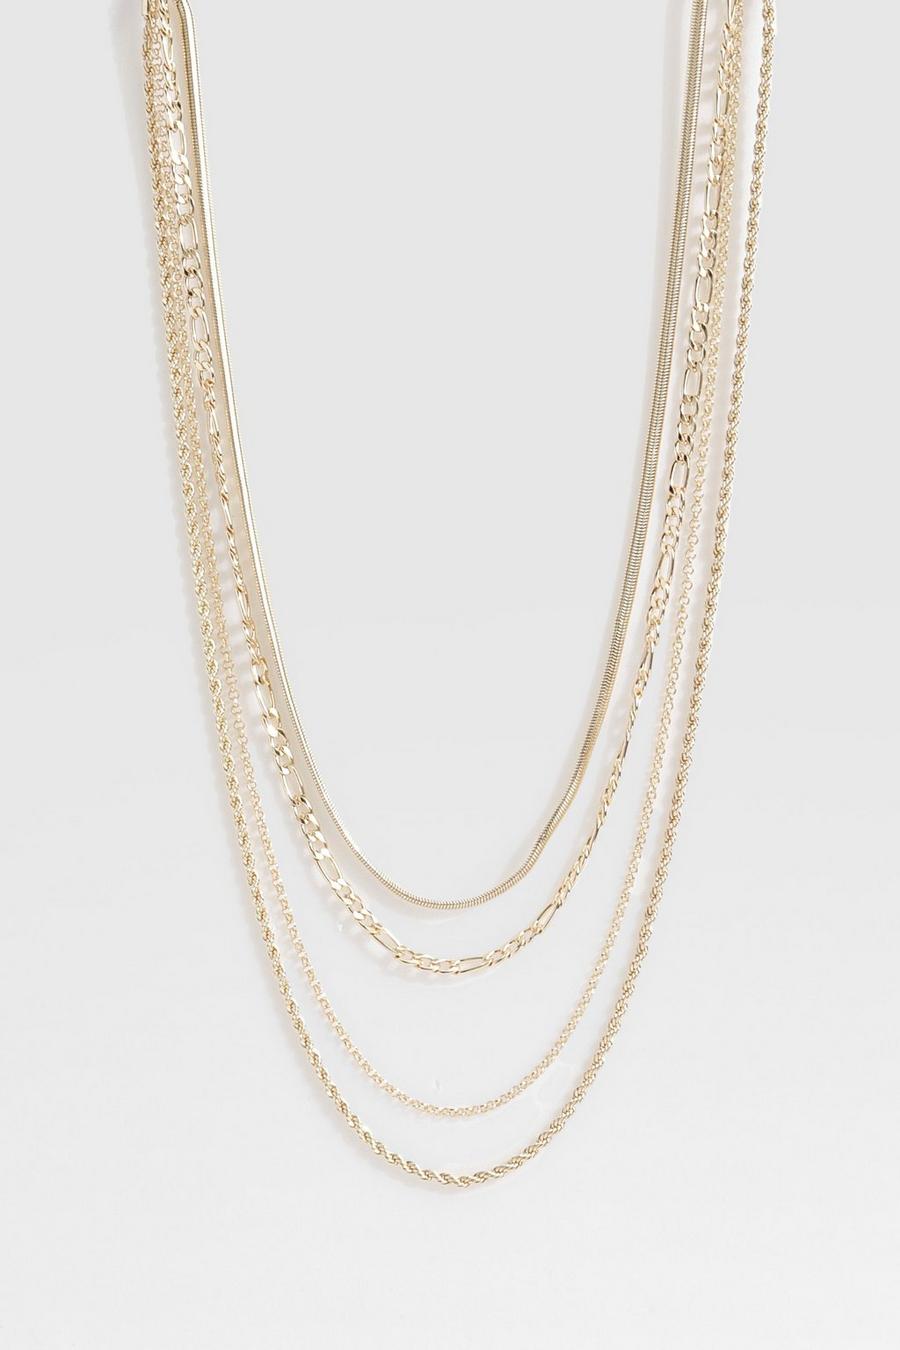 Gold Layered Snake Chain Necklaces